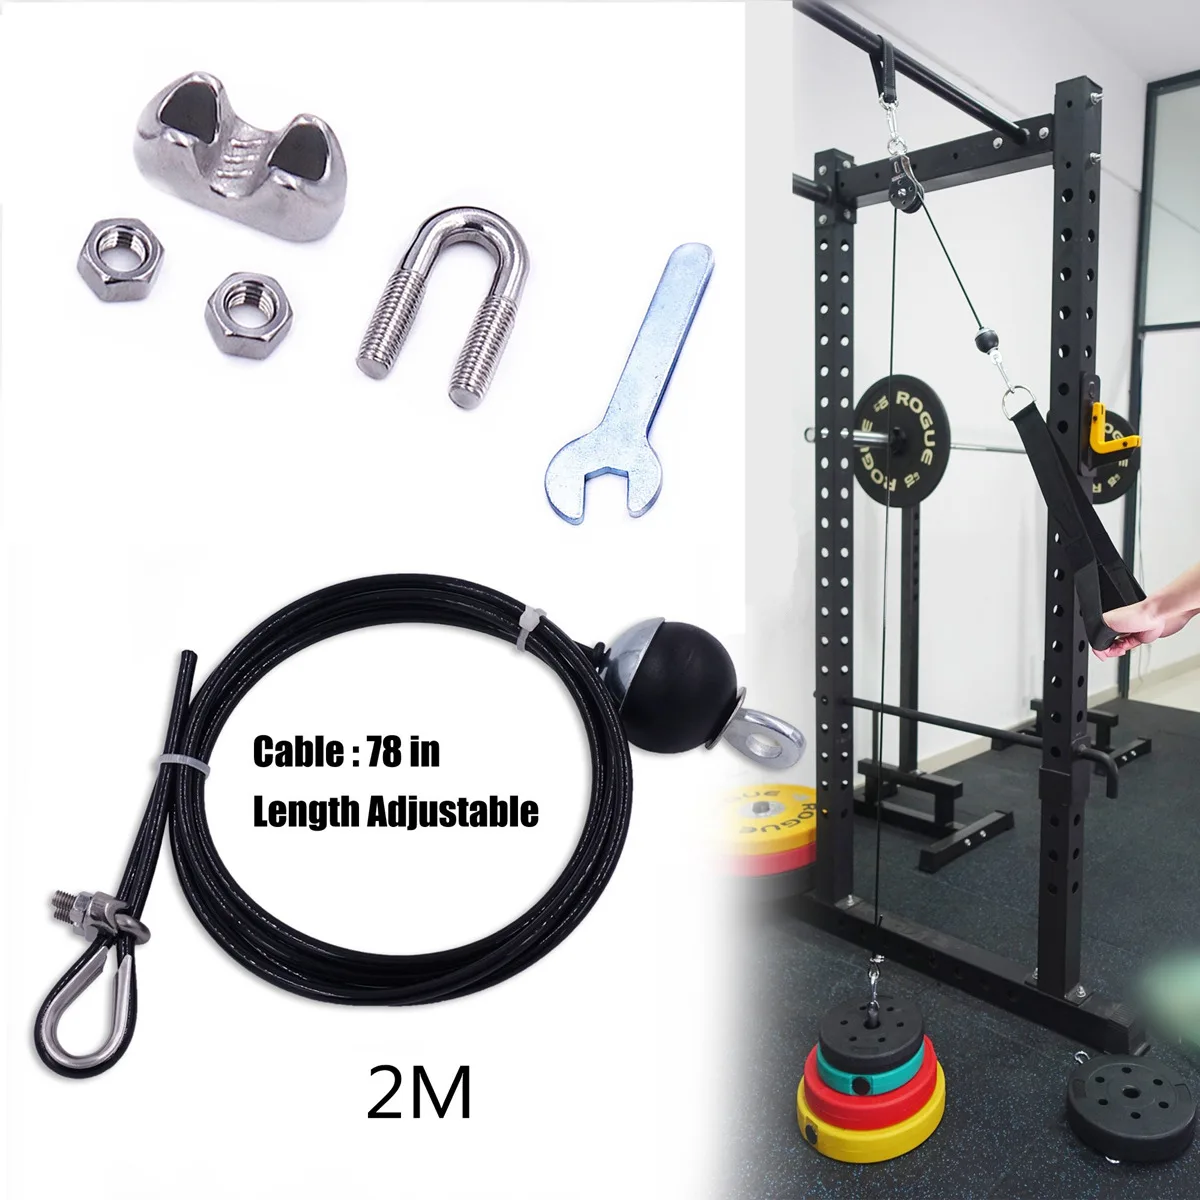 SYL Fitness Cable for DIY Home Garage Gym Cable Pulley System